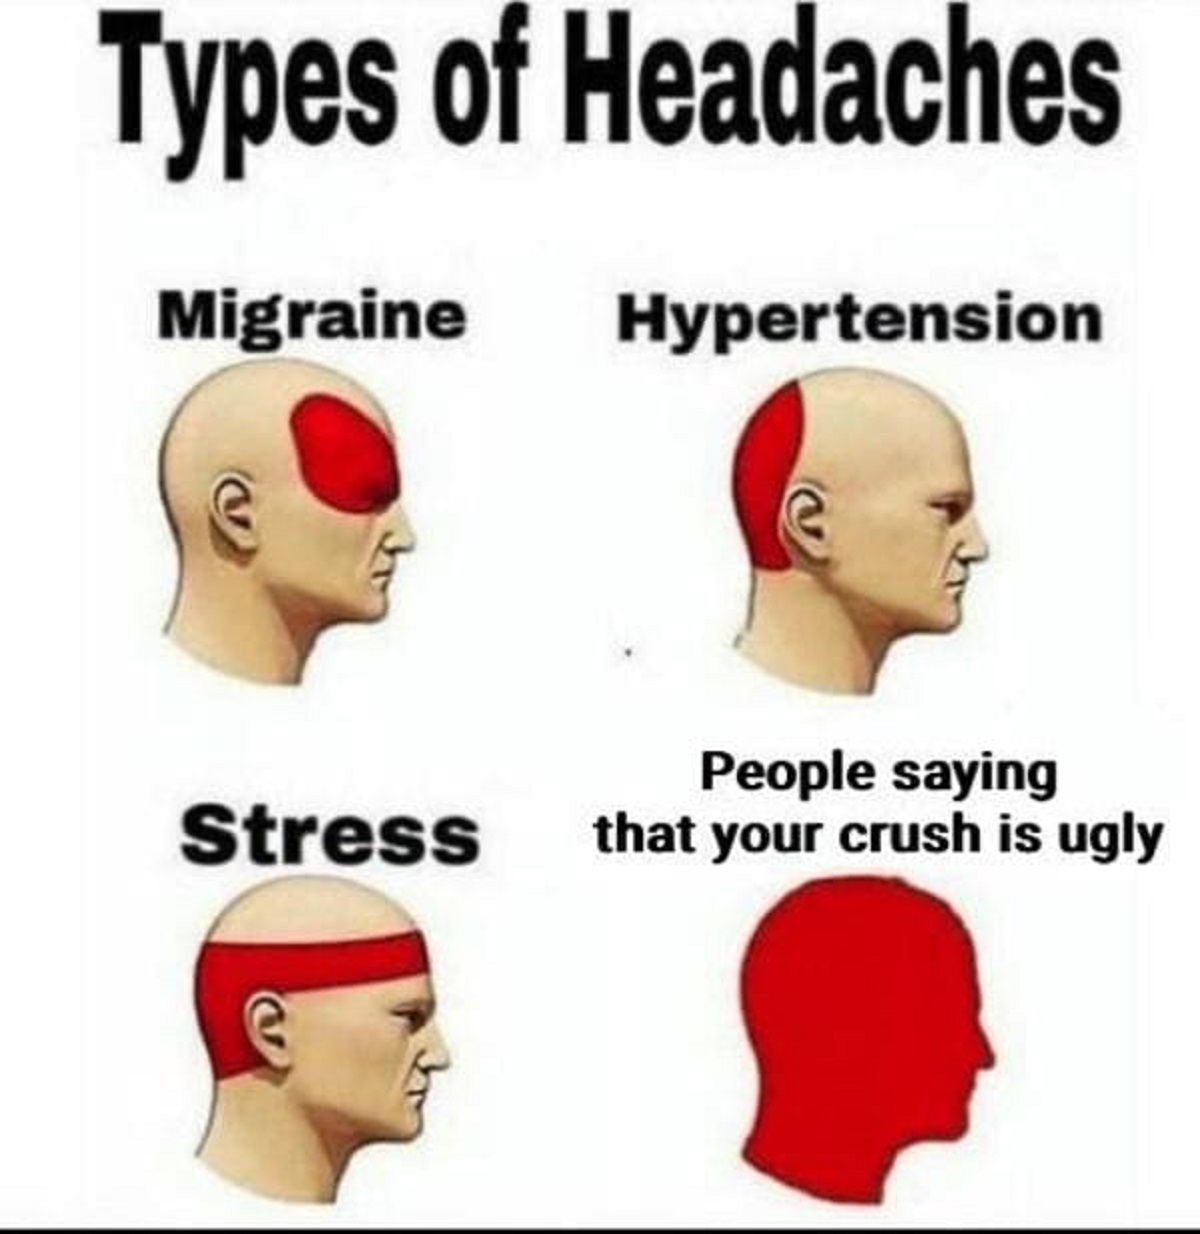 waking up with a headache meme - Types of Headaches Migraine Stress Hypertension People saying that your crush is ugly